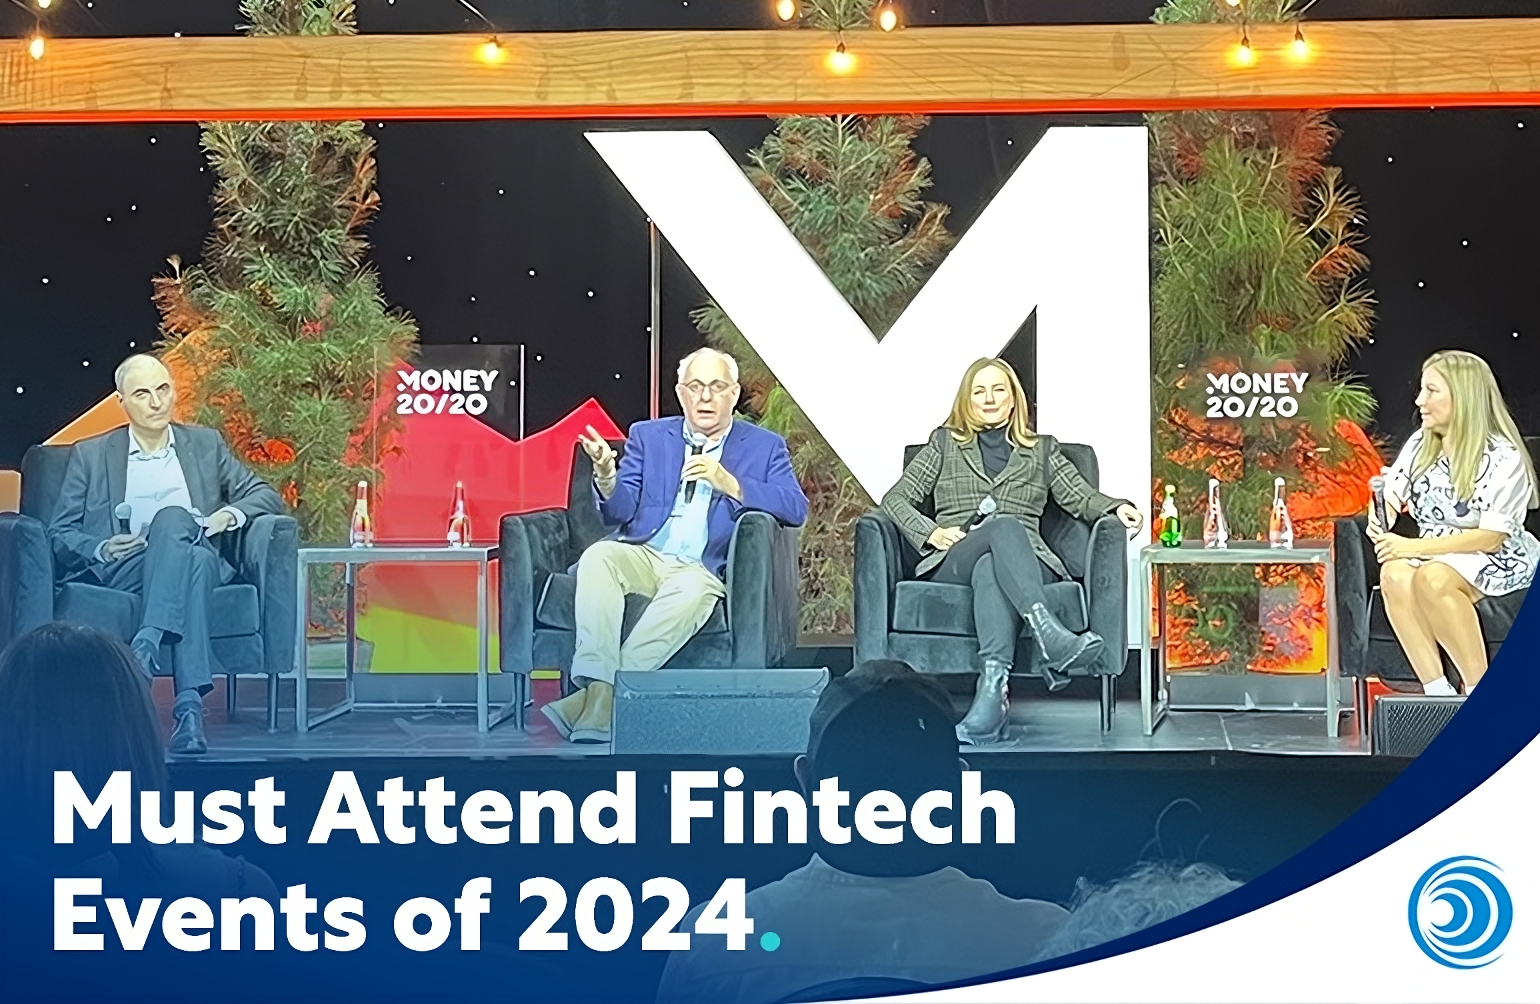 Must Attend Fintech Events of 2024: The Inclusive Guide